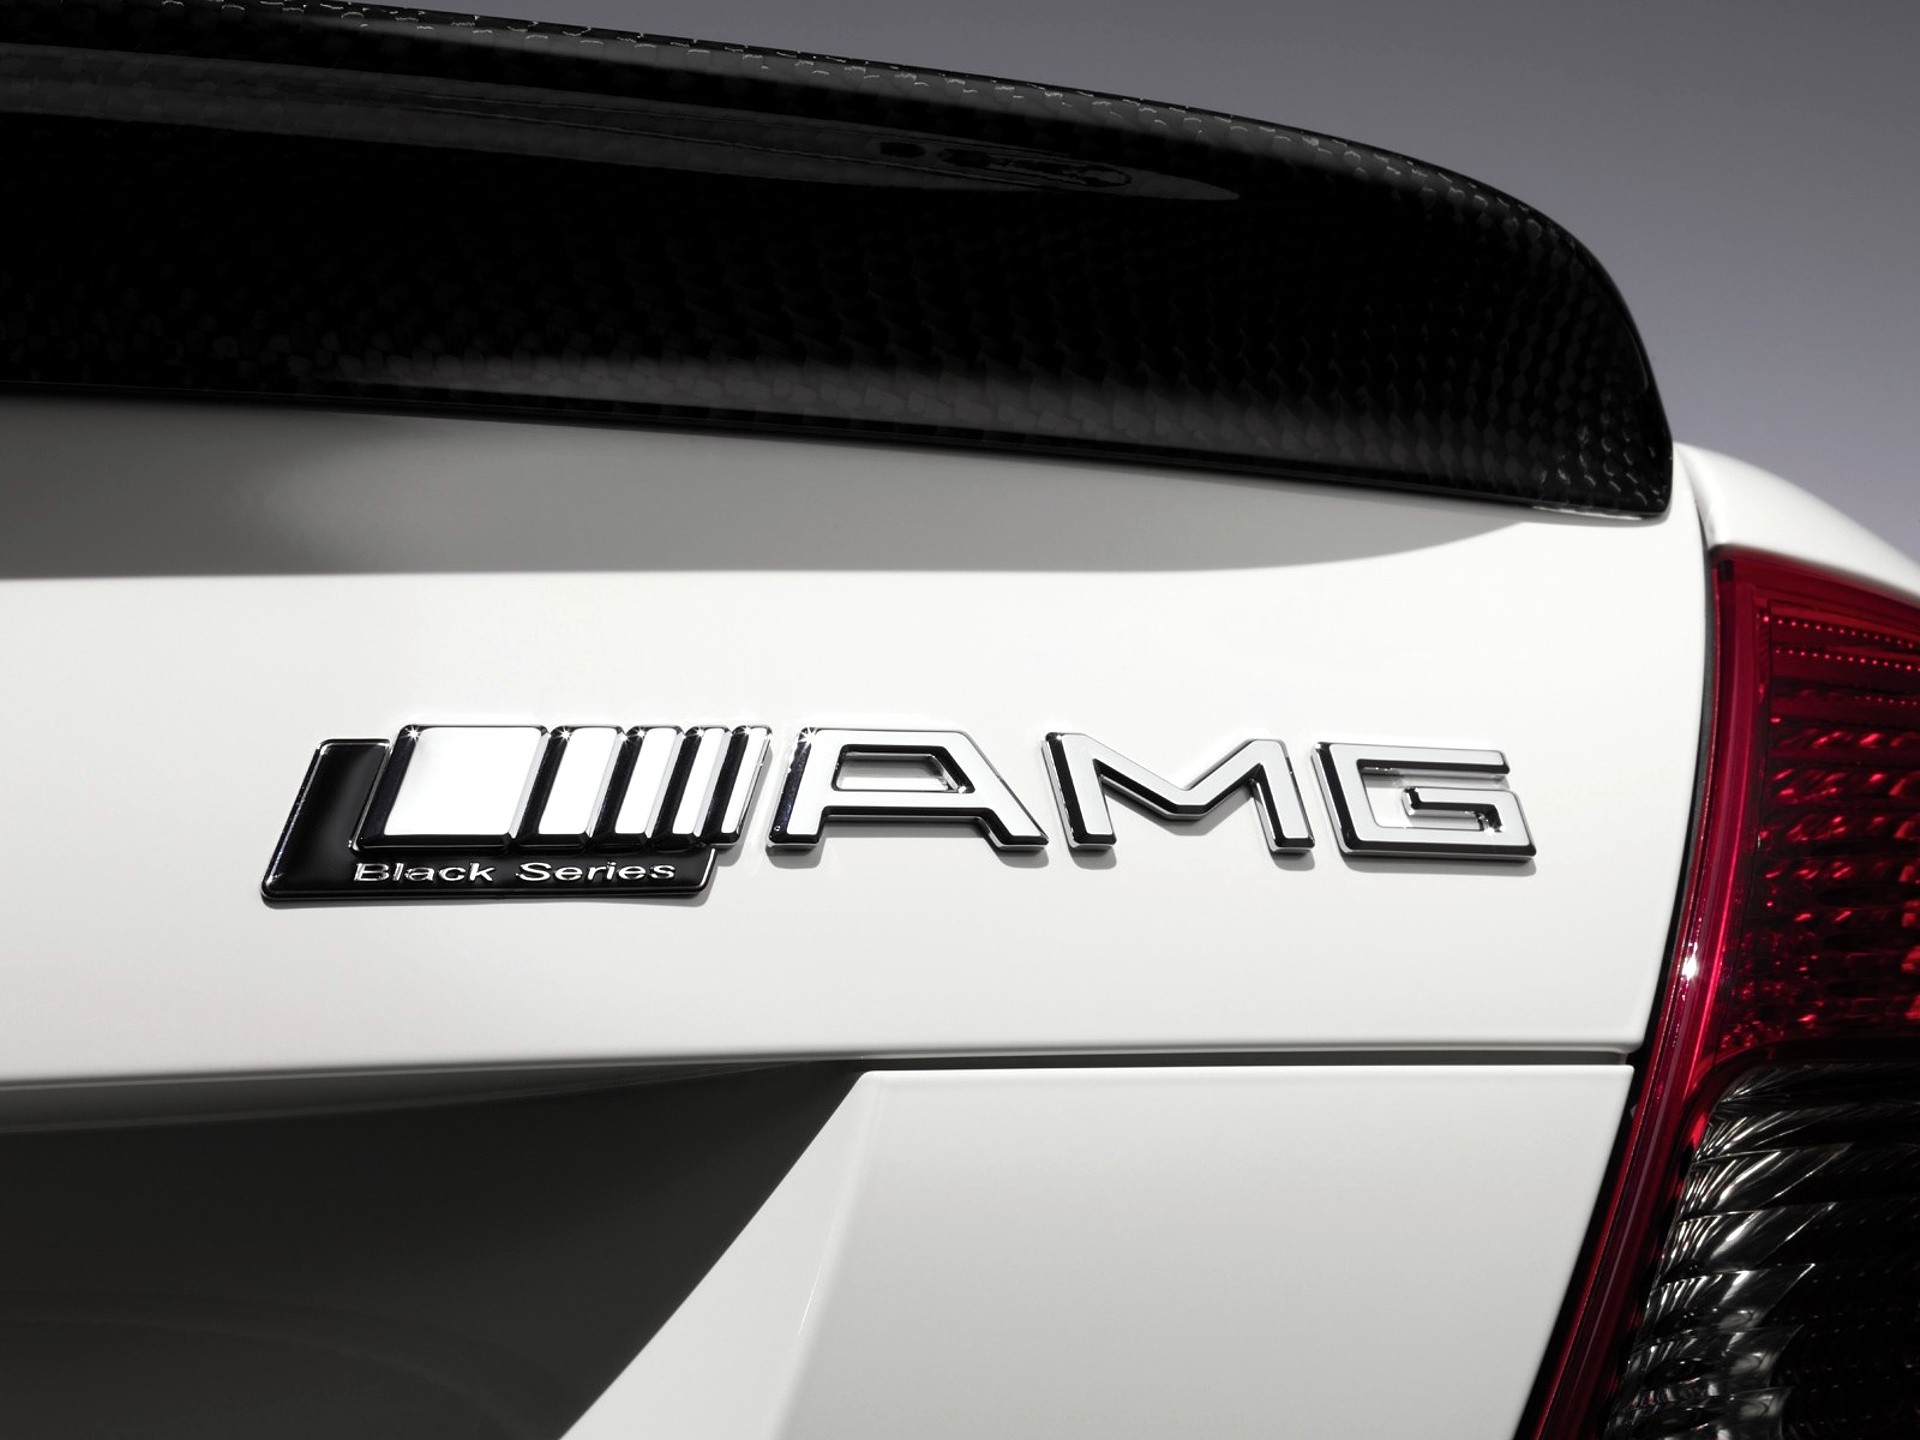 1920x1440 Mercedes AMG logo wallpapers from www.yours-cars.eu | Hd Wallpapers Cars |  Pinterest | Mercedes AMG, Cars and Dream cars